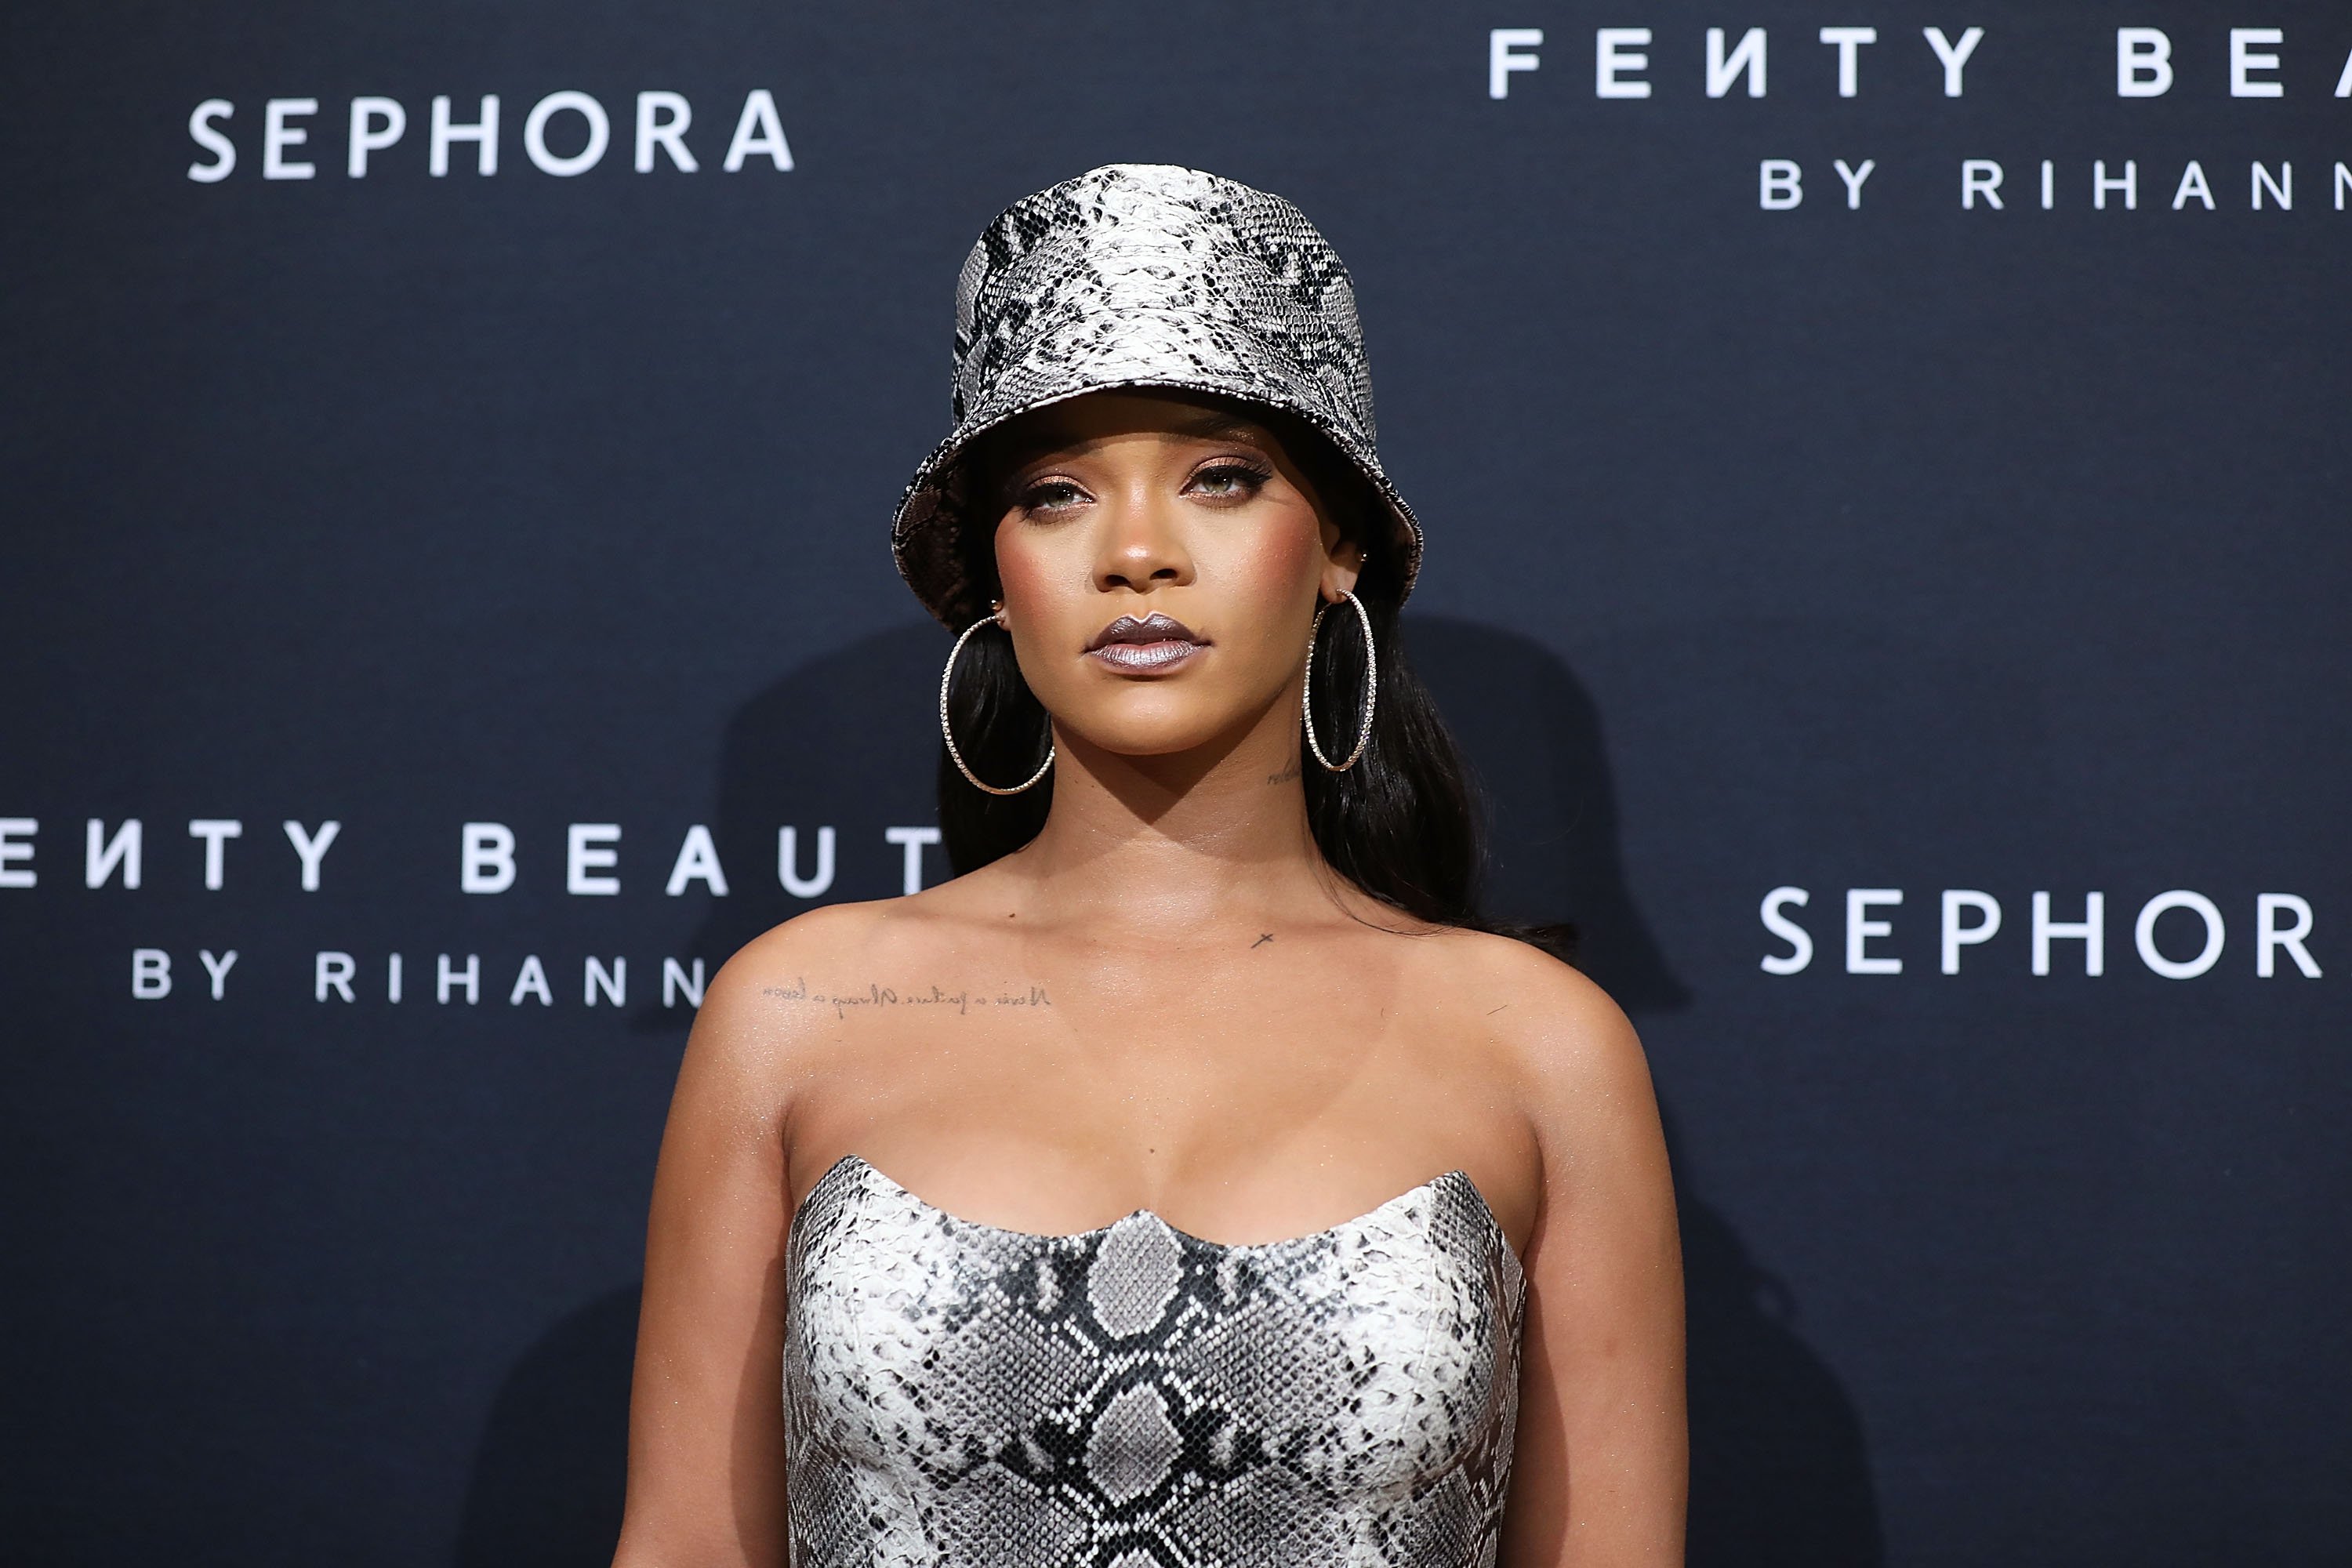 Rihanna attends the Fenty Beauty by Rihanna Anniversary Event at Overseas Passenger Terminal on October 3, 2018. | Photo: GettyImages